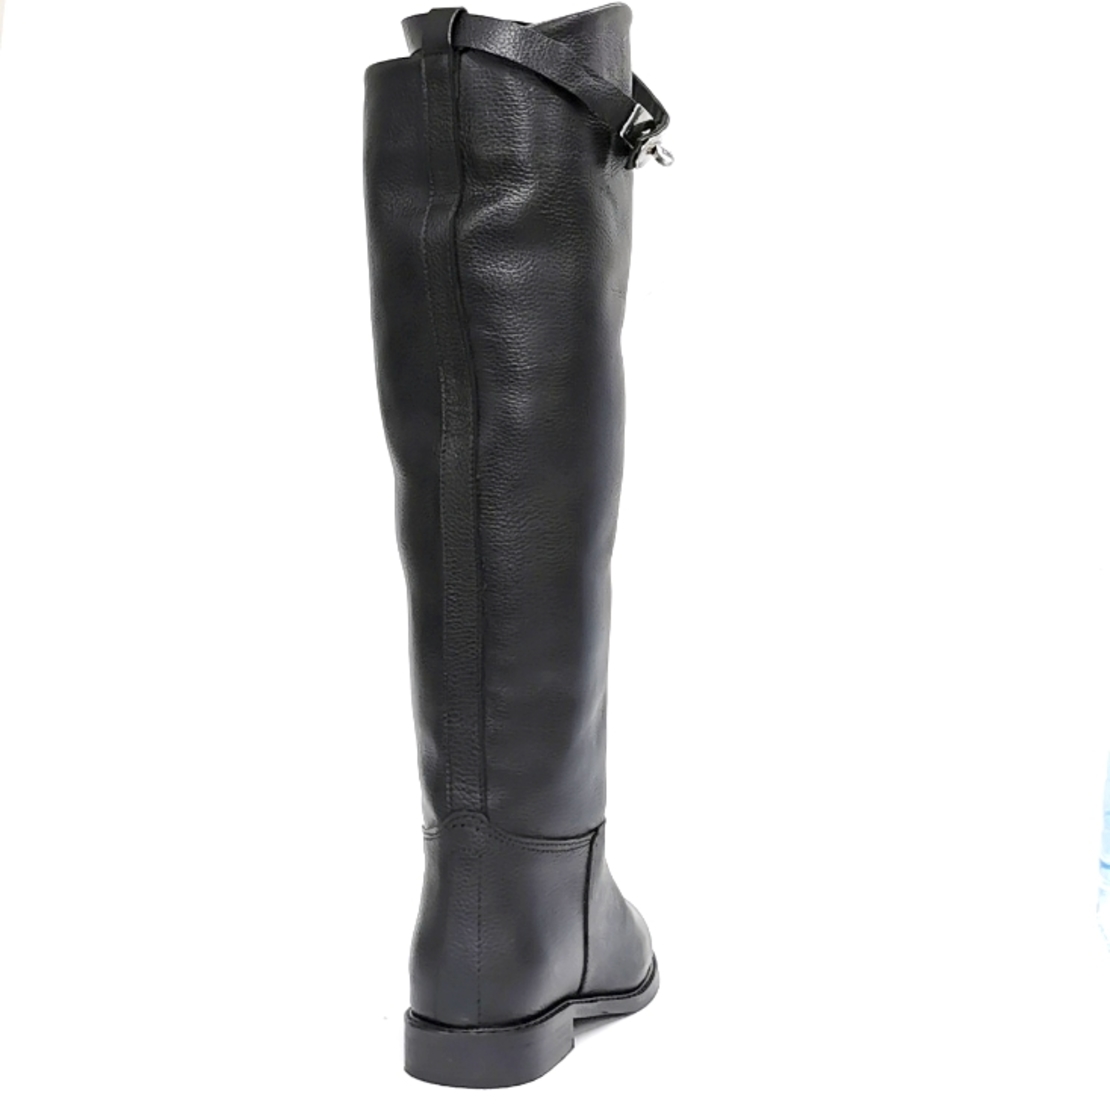 Women's casual boots made of natural leather in black/73419